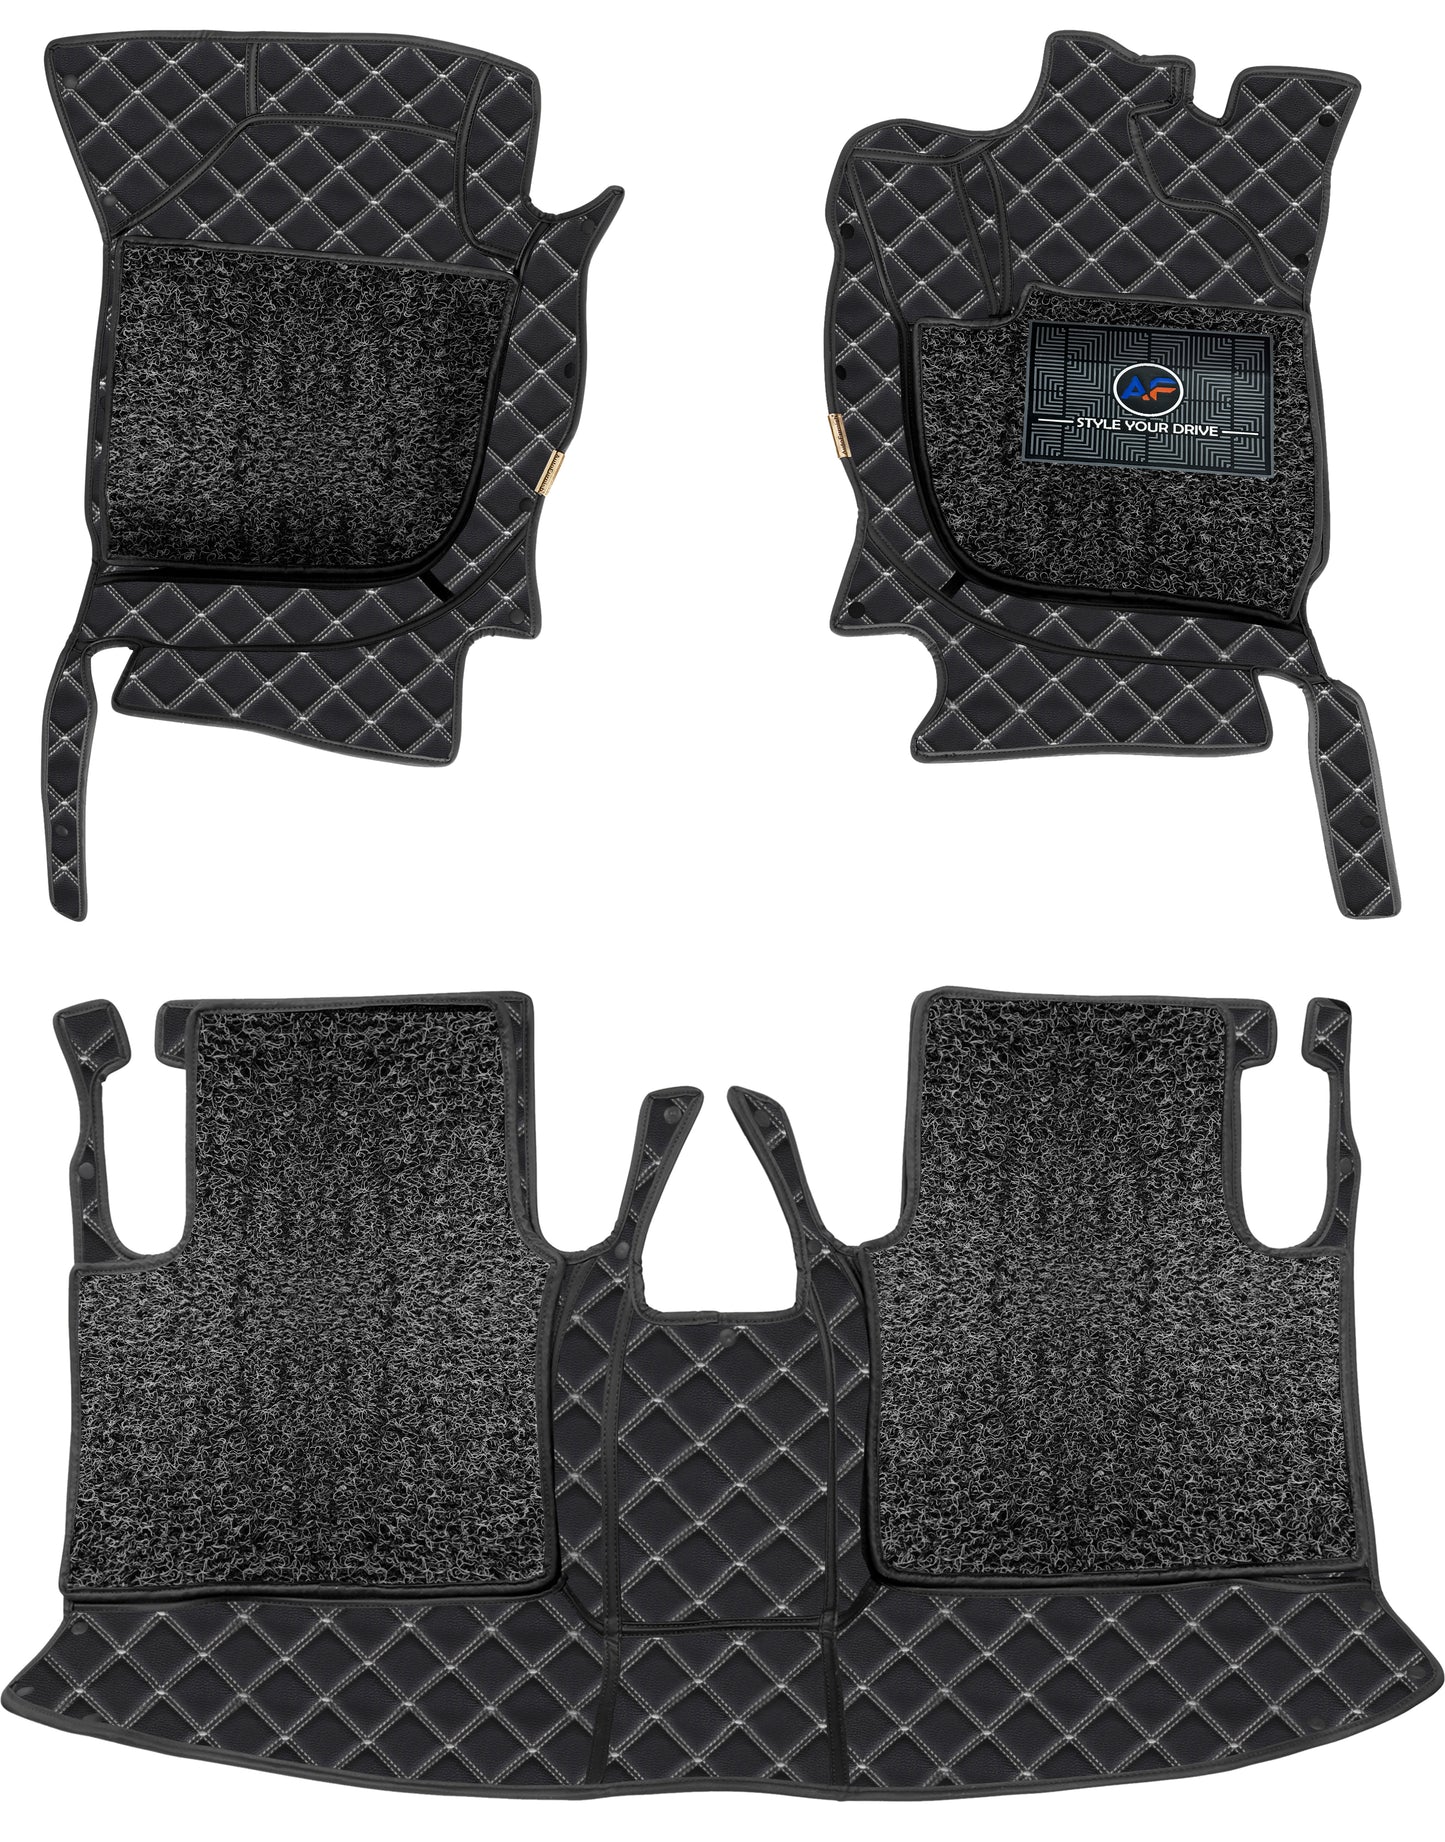 Tata Harrier 2019 7D Luxury Car Mat, All Weather Proof, Anti-Skid, 100% Waterproof & Odorless with Unique Diamond Fish Design (24mm Luxury PU Leather, 2 Rows)